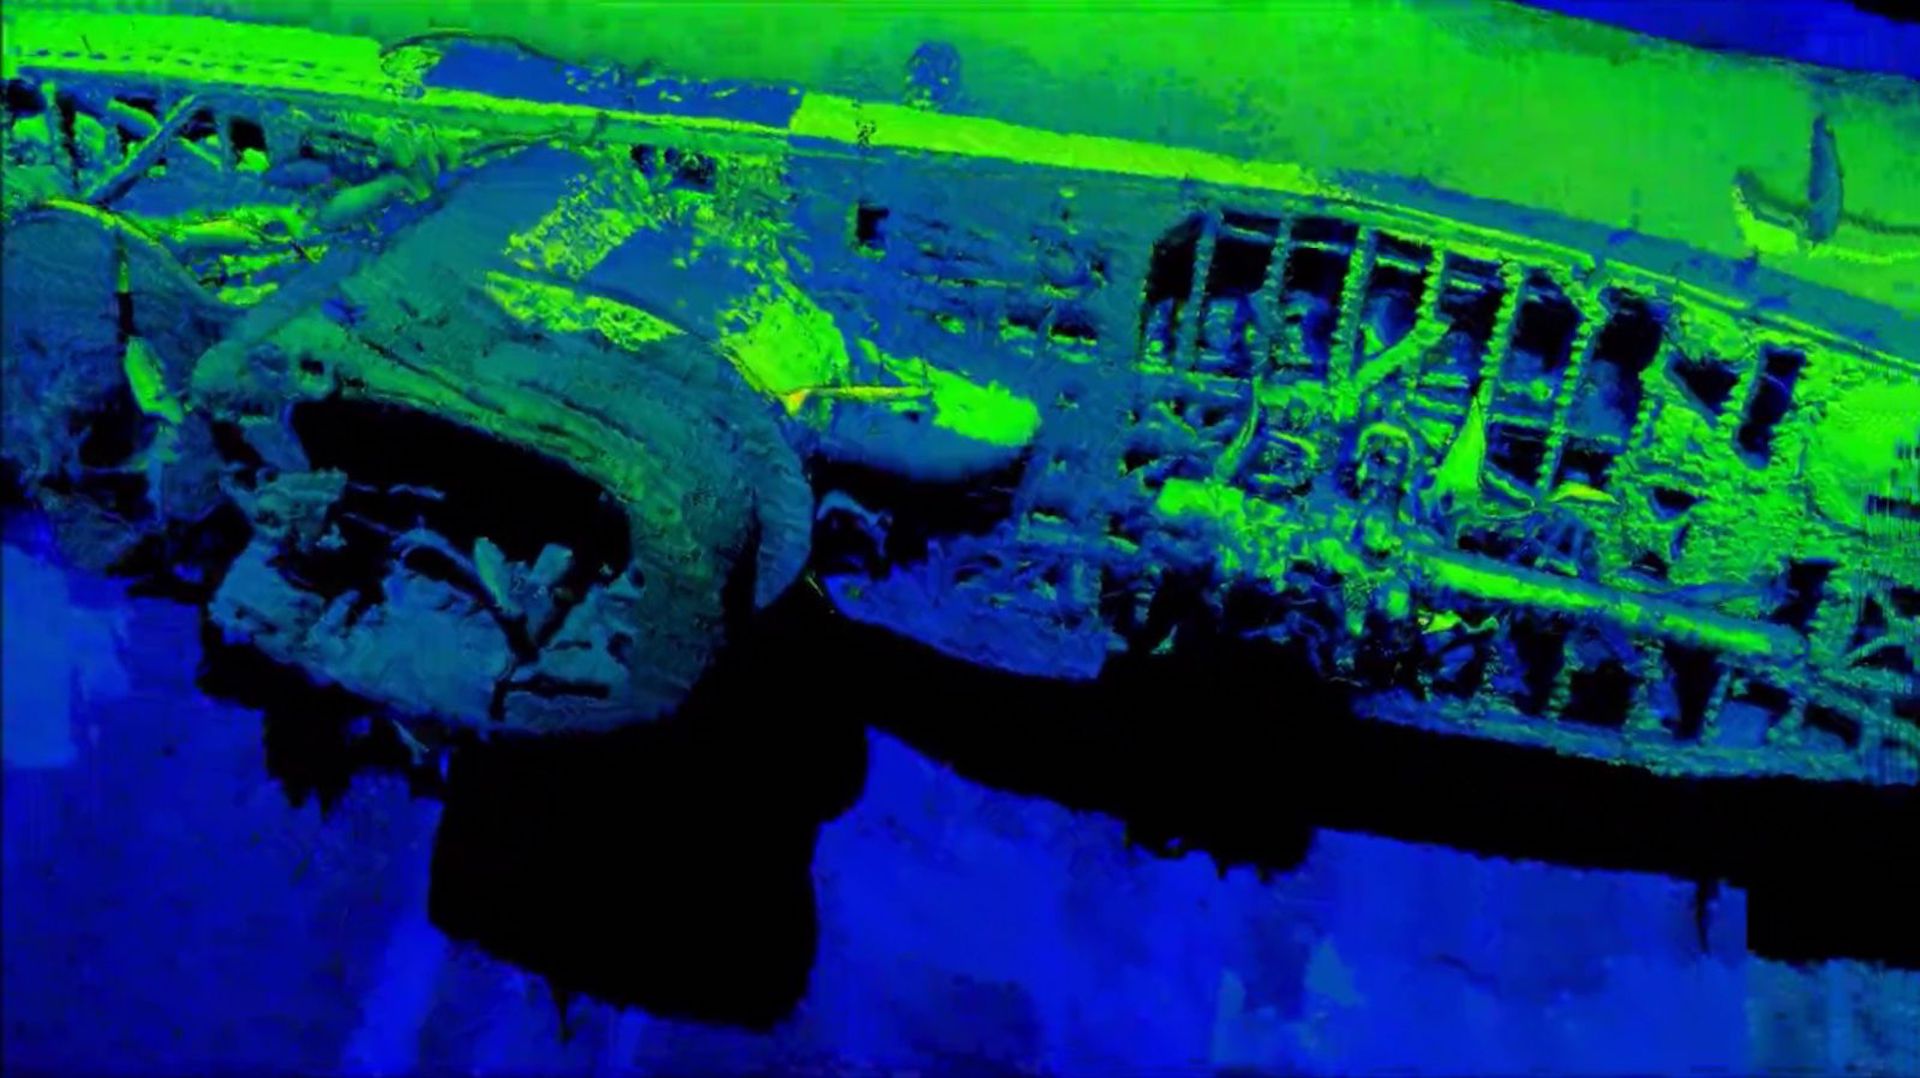 Laser Scan Shows German Submarine That Sank Over 70 Years Ago